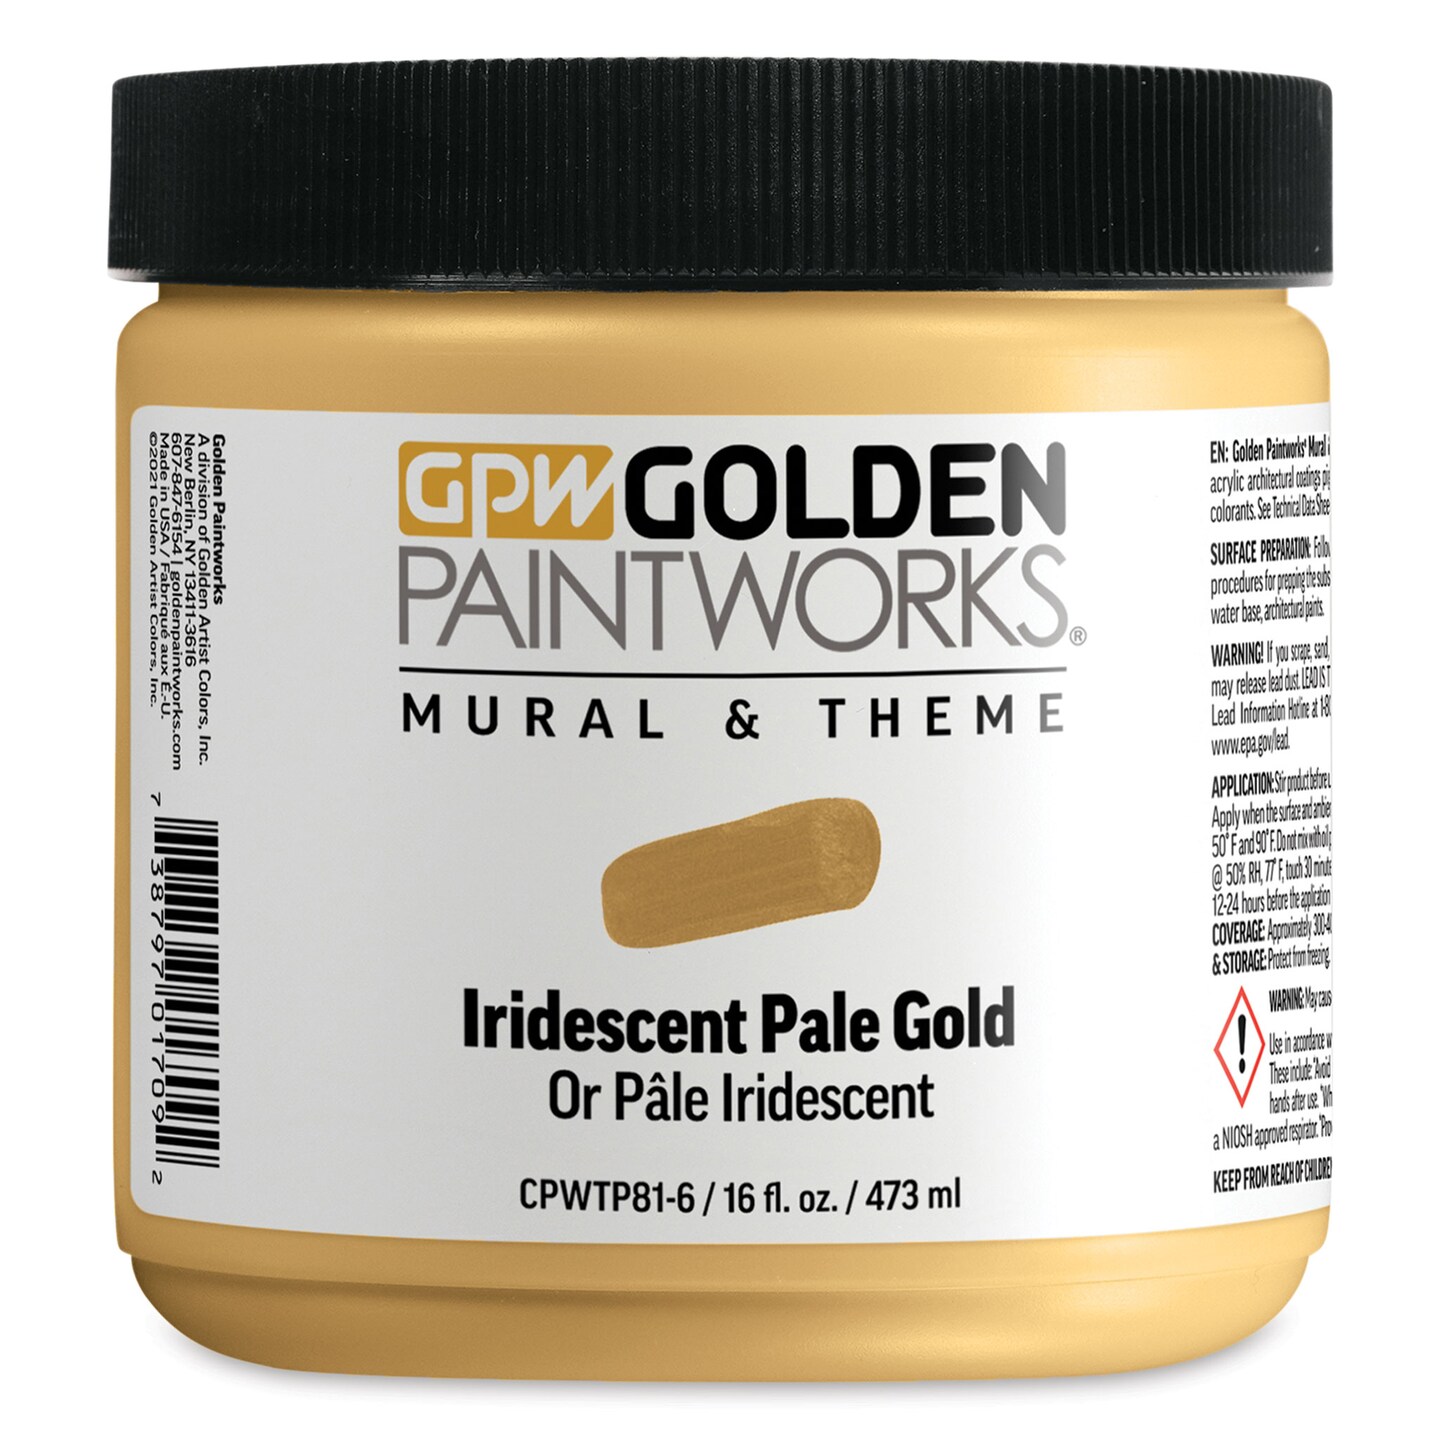 Golden Paintworks Mural and Theme Acrylic Paint - Iridescent Pale Gold, 16 oz, Jar